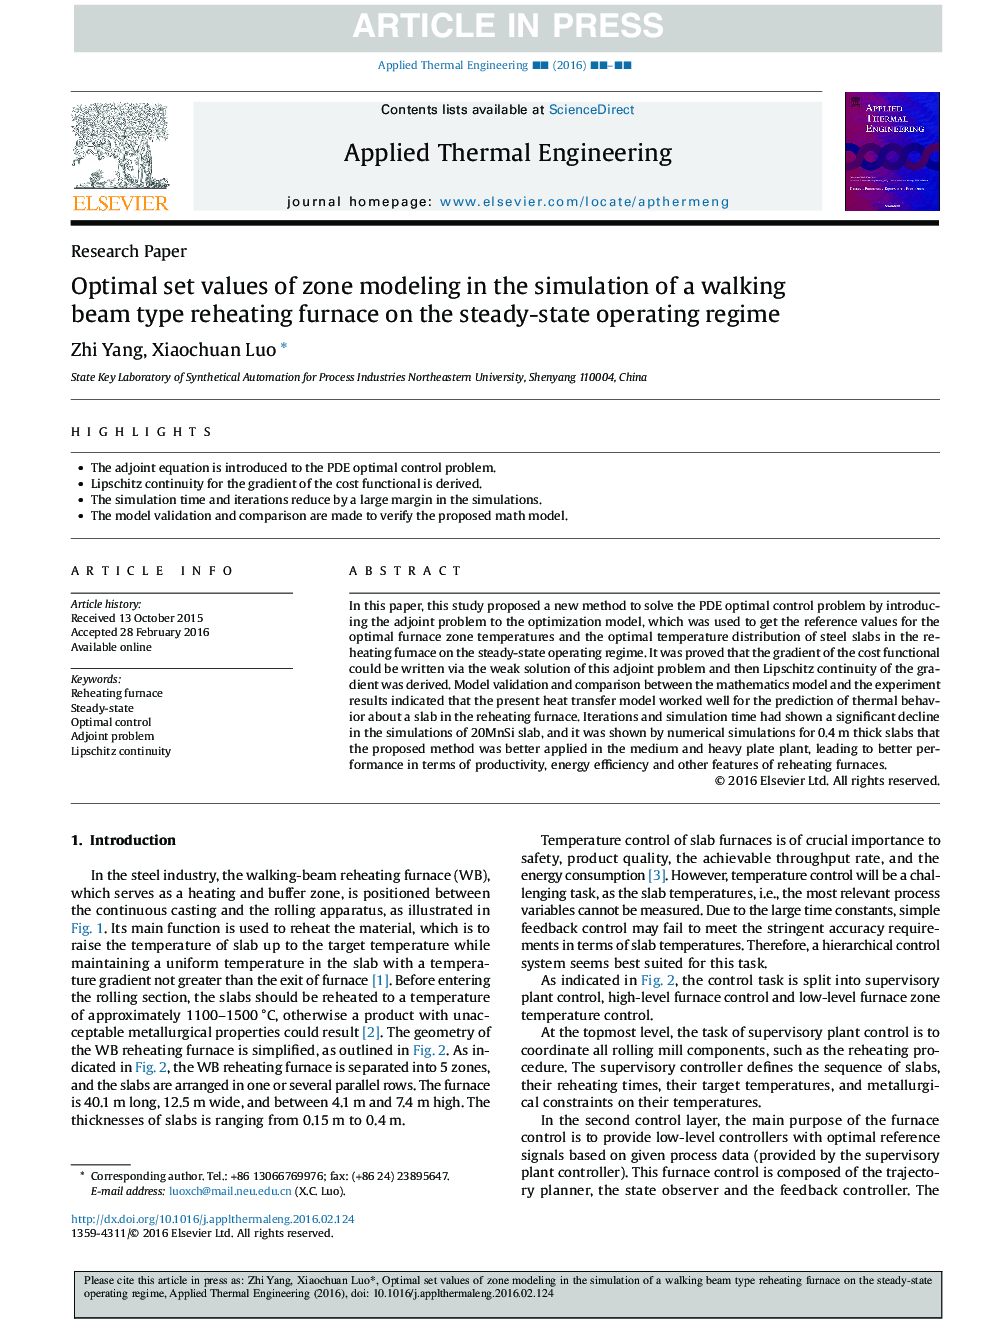 Optimal set values of zone modeling in the simulation of a walking beam type reheating furnace on the steady-state operating regime